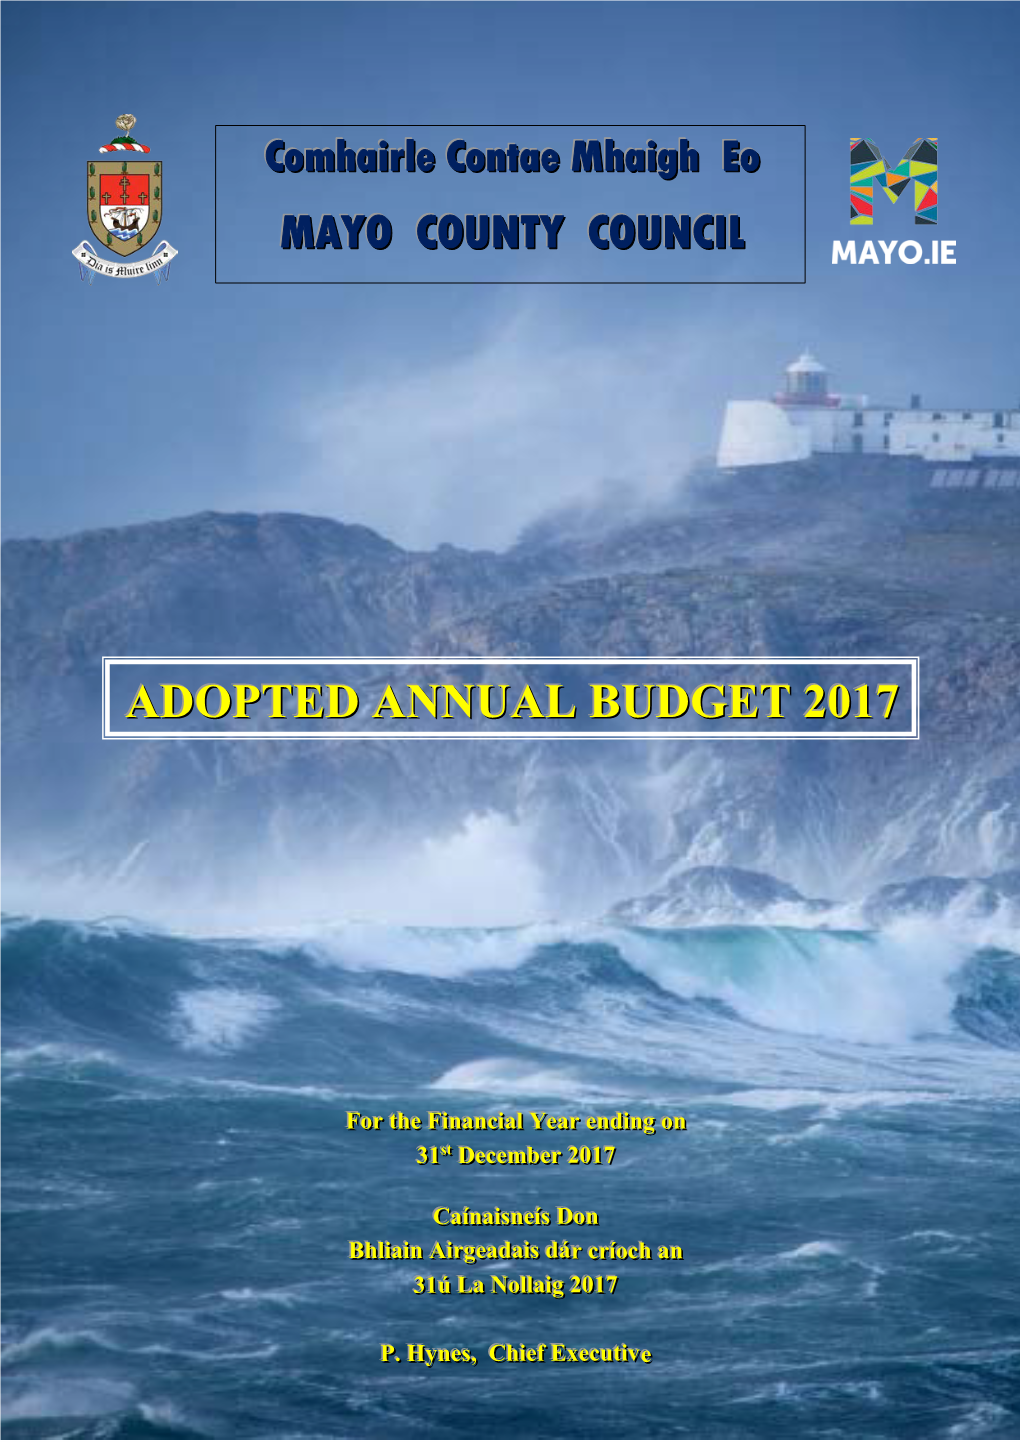 Mayo County Council Adopted Annual Budget 2017